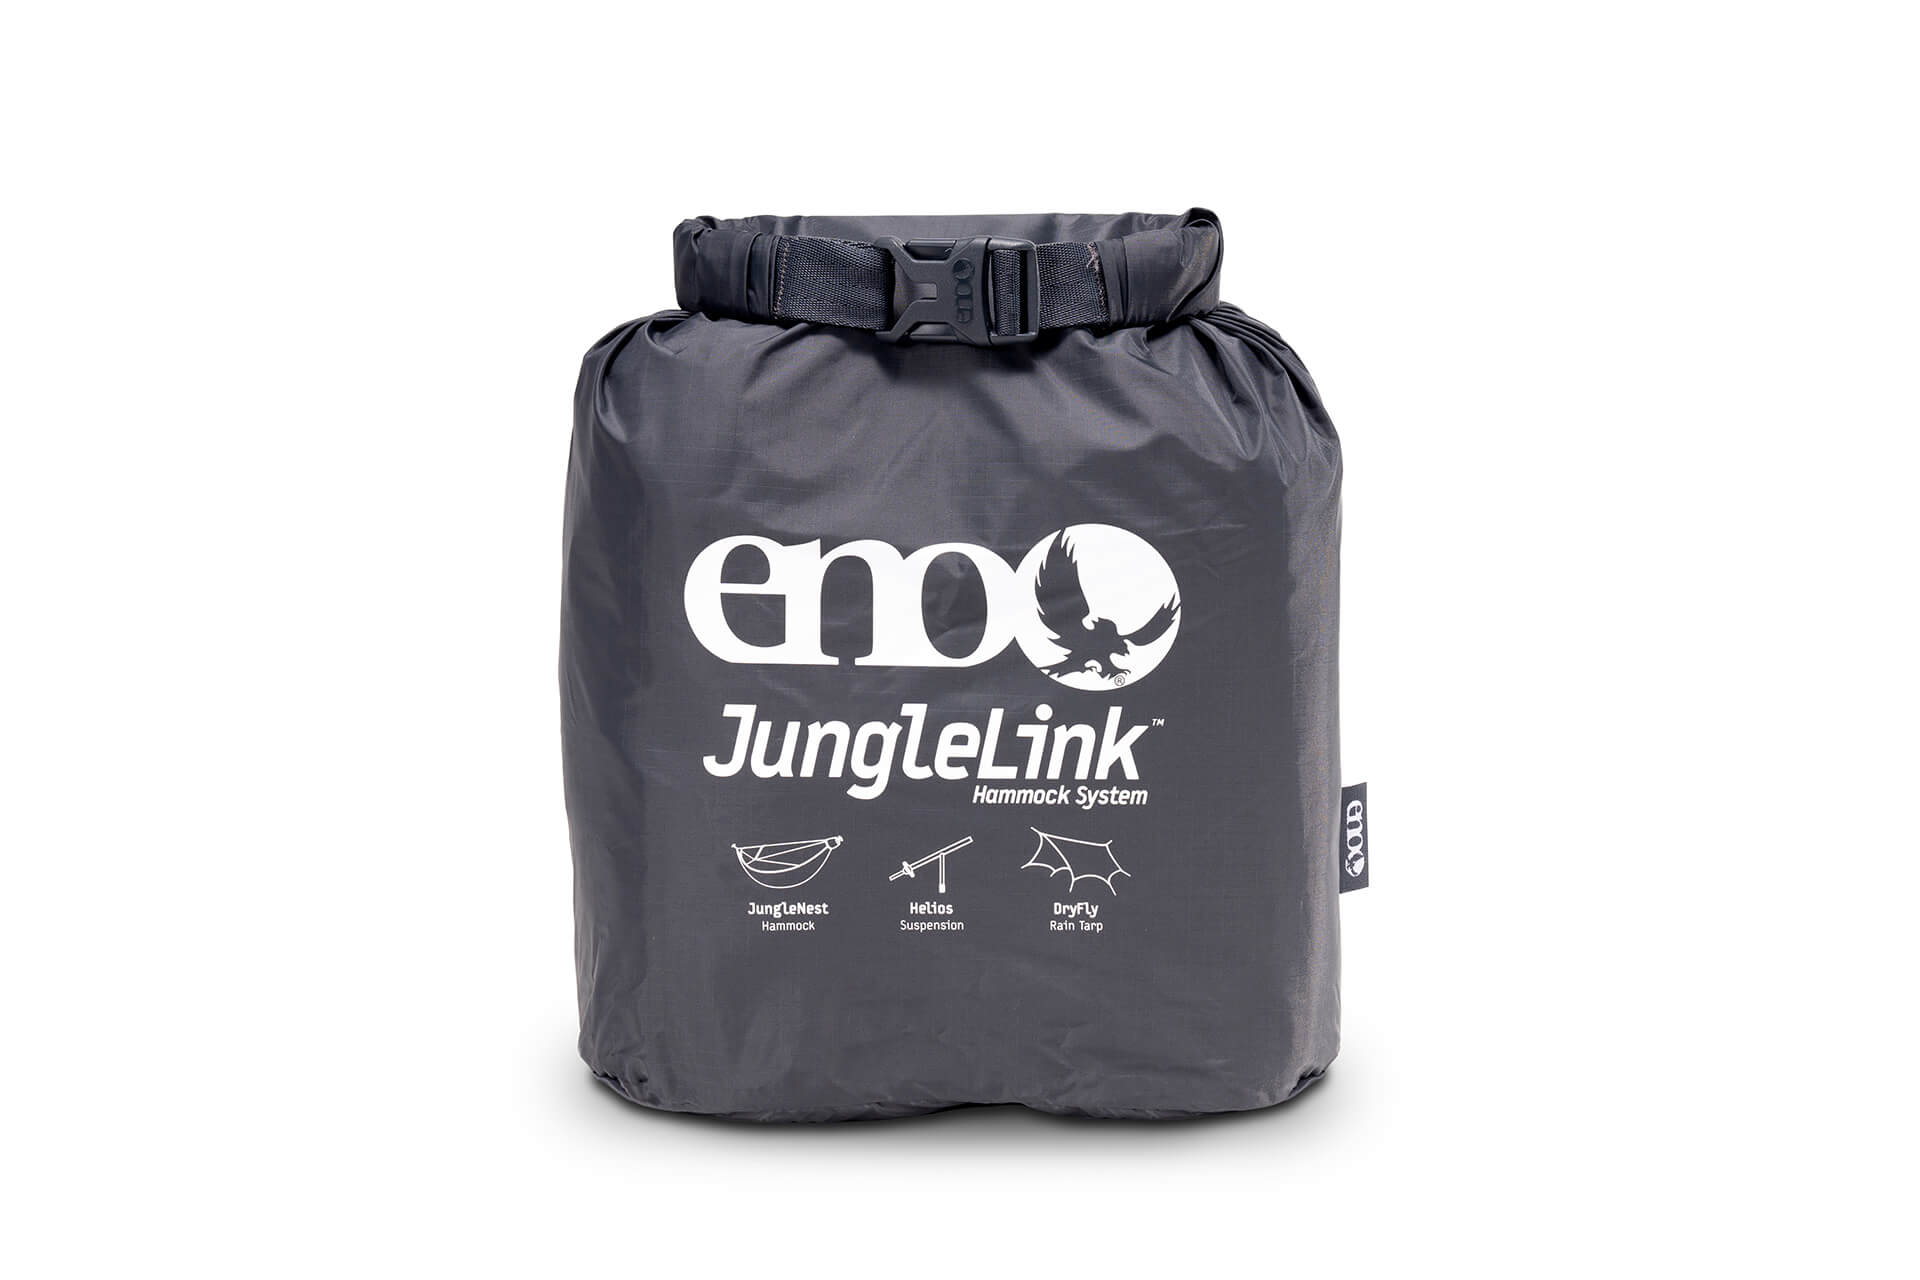 Eagles Nest Outfitters, Inc. Shelter Systems JungleLink™ Hammock System